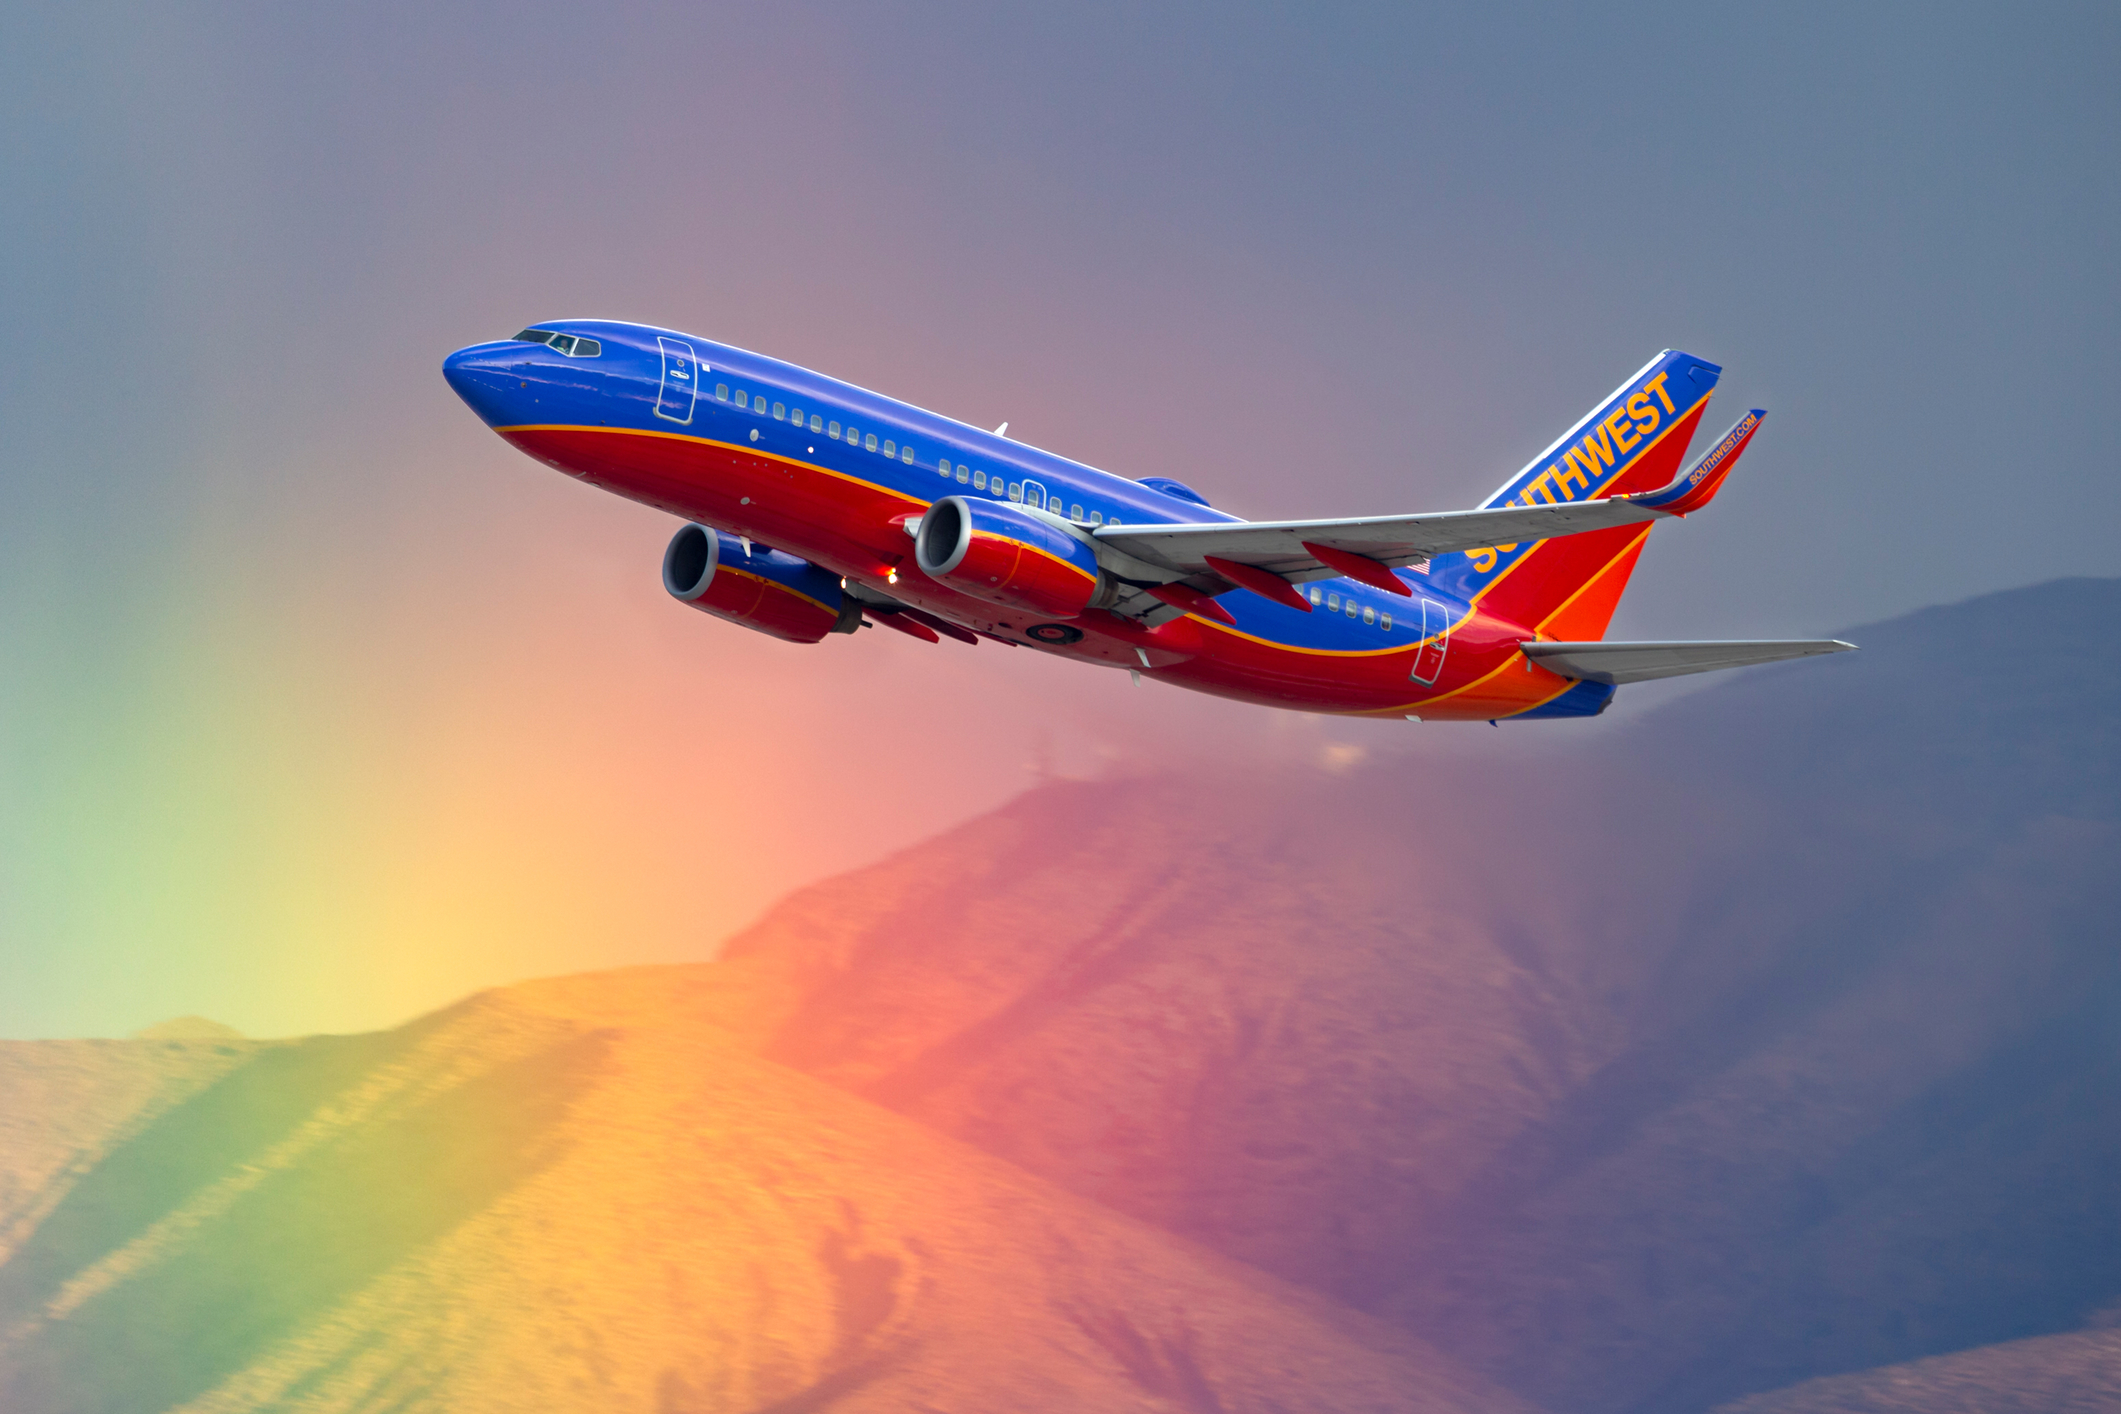 Get a FREE Southwest Companion Pass for a limited time